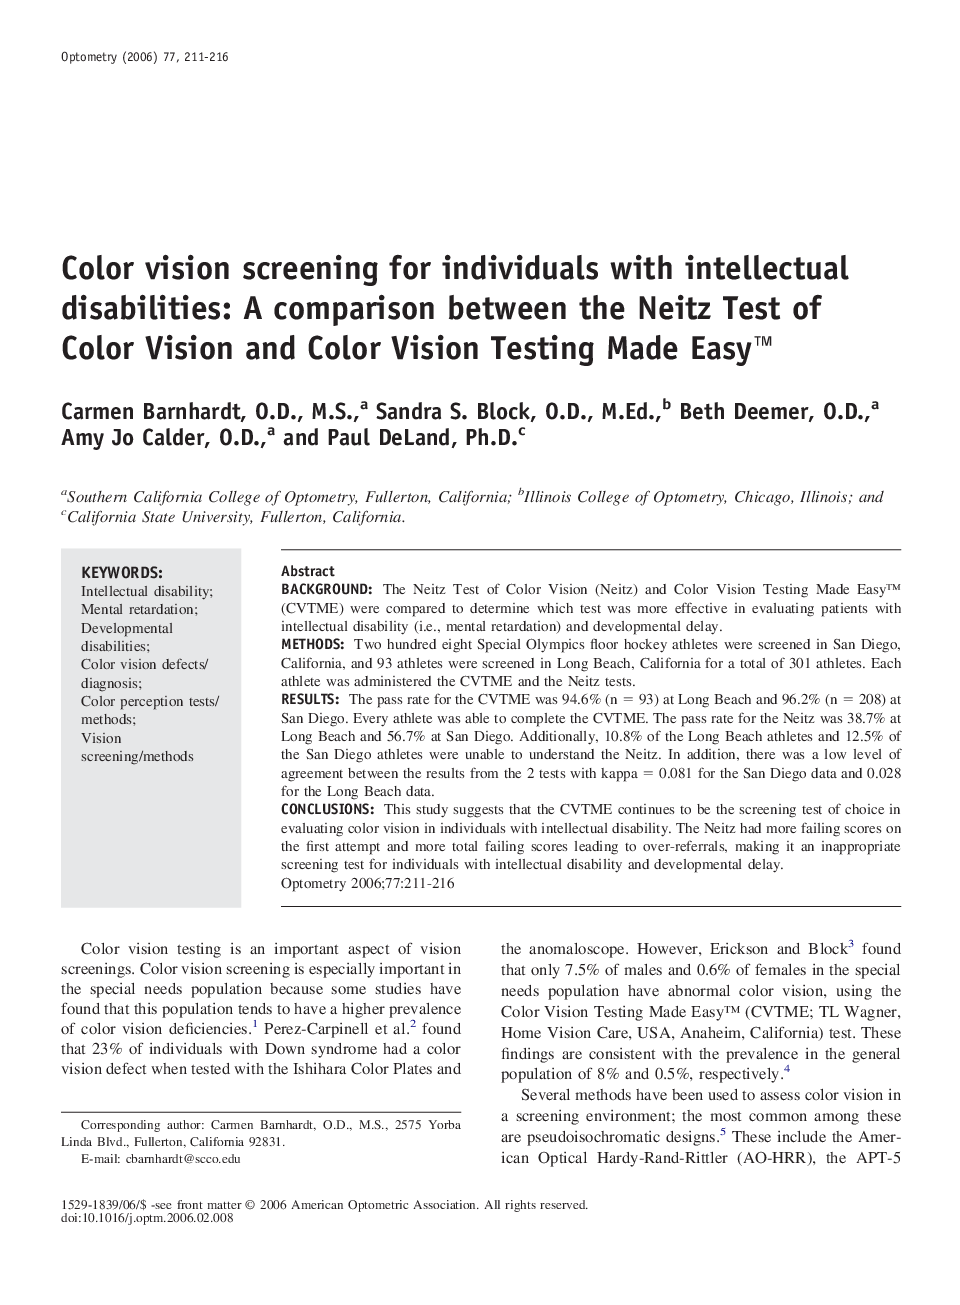 Color vision screening for individuals with intellectual disabilities: A comparison between the Neitz Test of Color Vision and Color Vision Testing Made Easy™